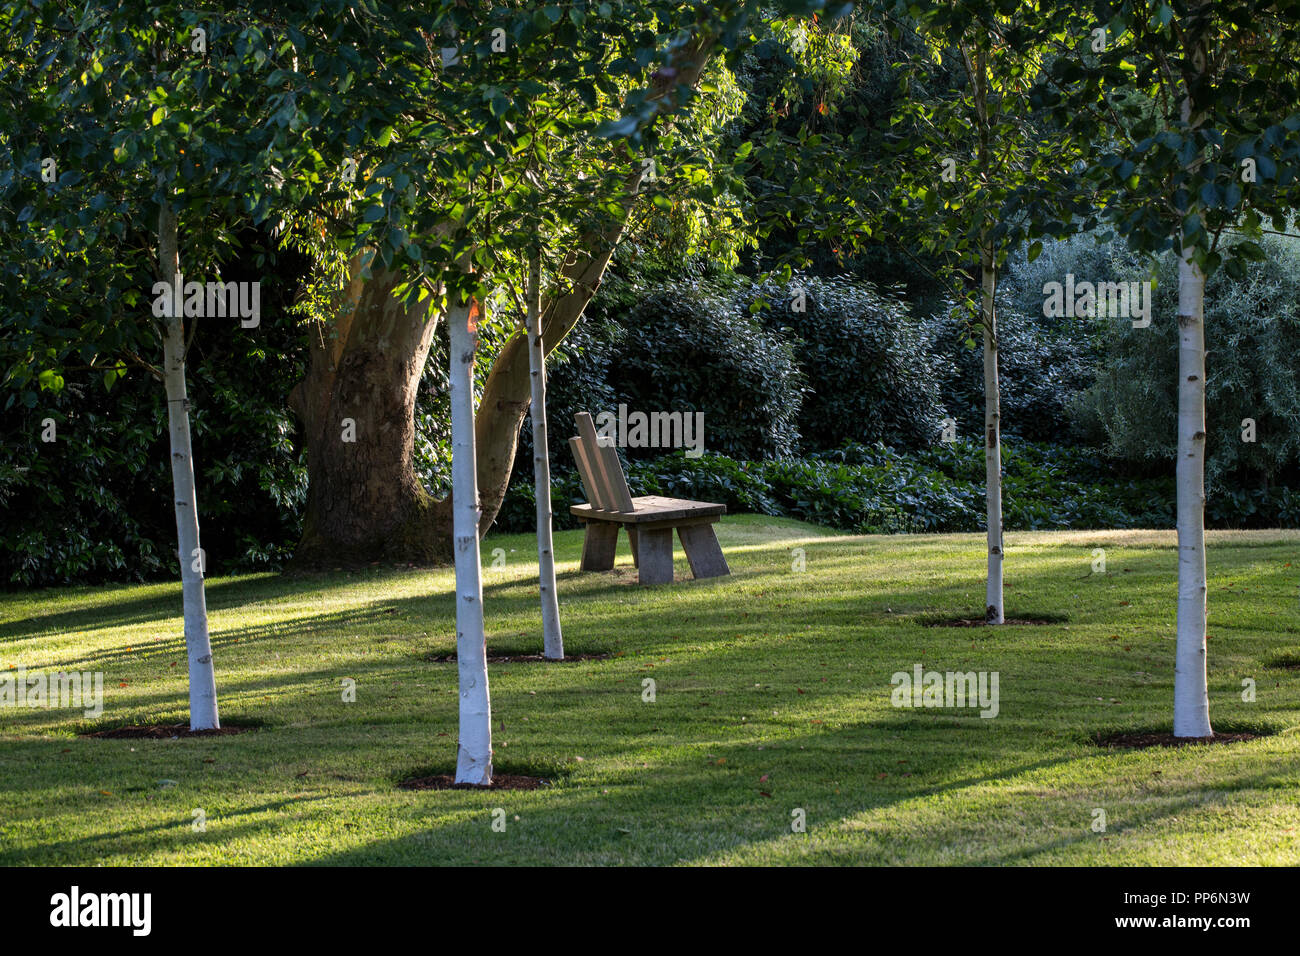 Shady lawned orchard area with young birch trees and wooden bench. Stock Photo